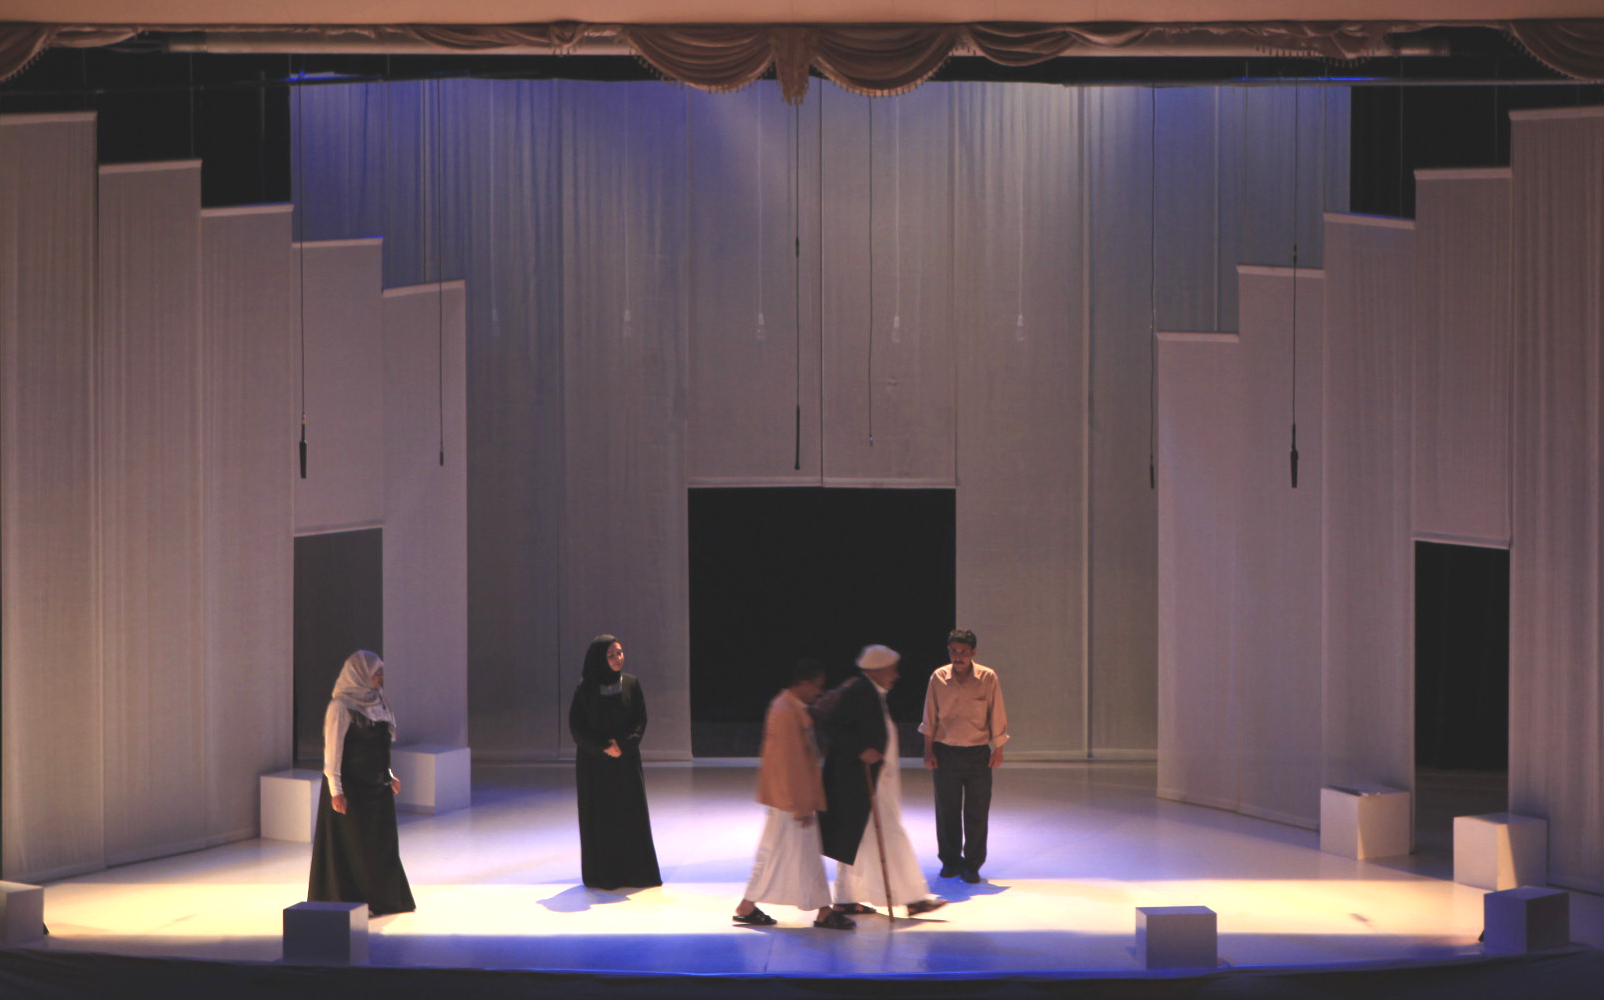 Molière's "Le Malade imaginaire" in Arabic - Directed by Adel Hakim - National Theatre in Sanaa. Coproduction Théâtre des Quartiers d'Ivry (France) - French Cultural Centre in Sanaa -Ministery of Culture, Yemen.